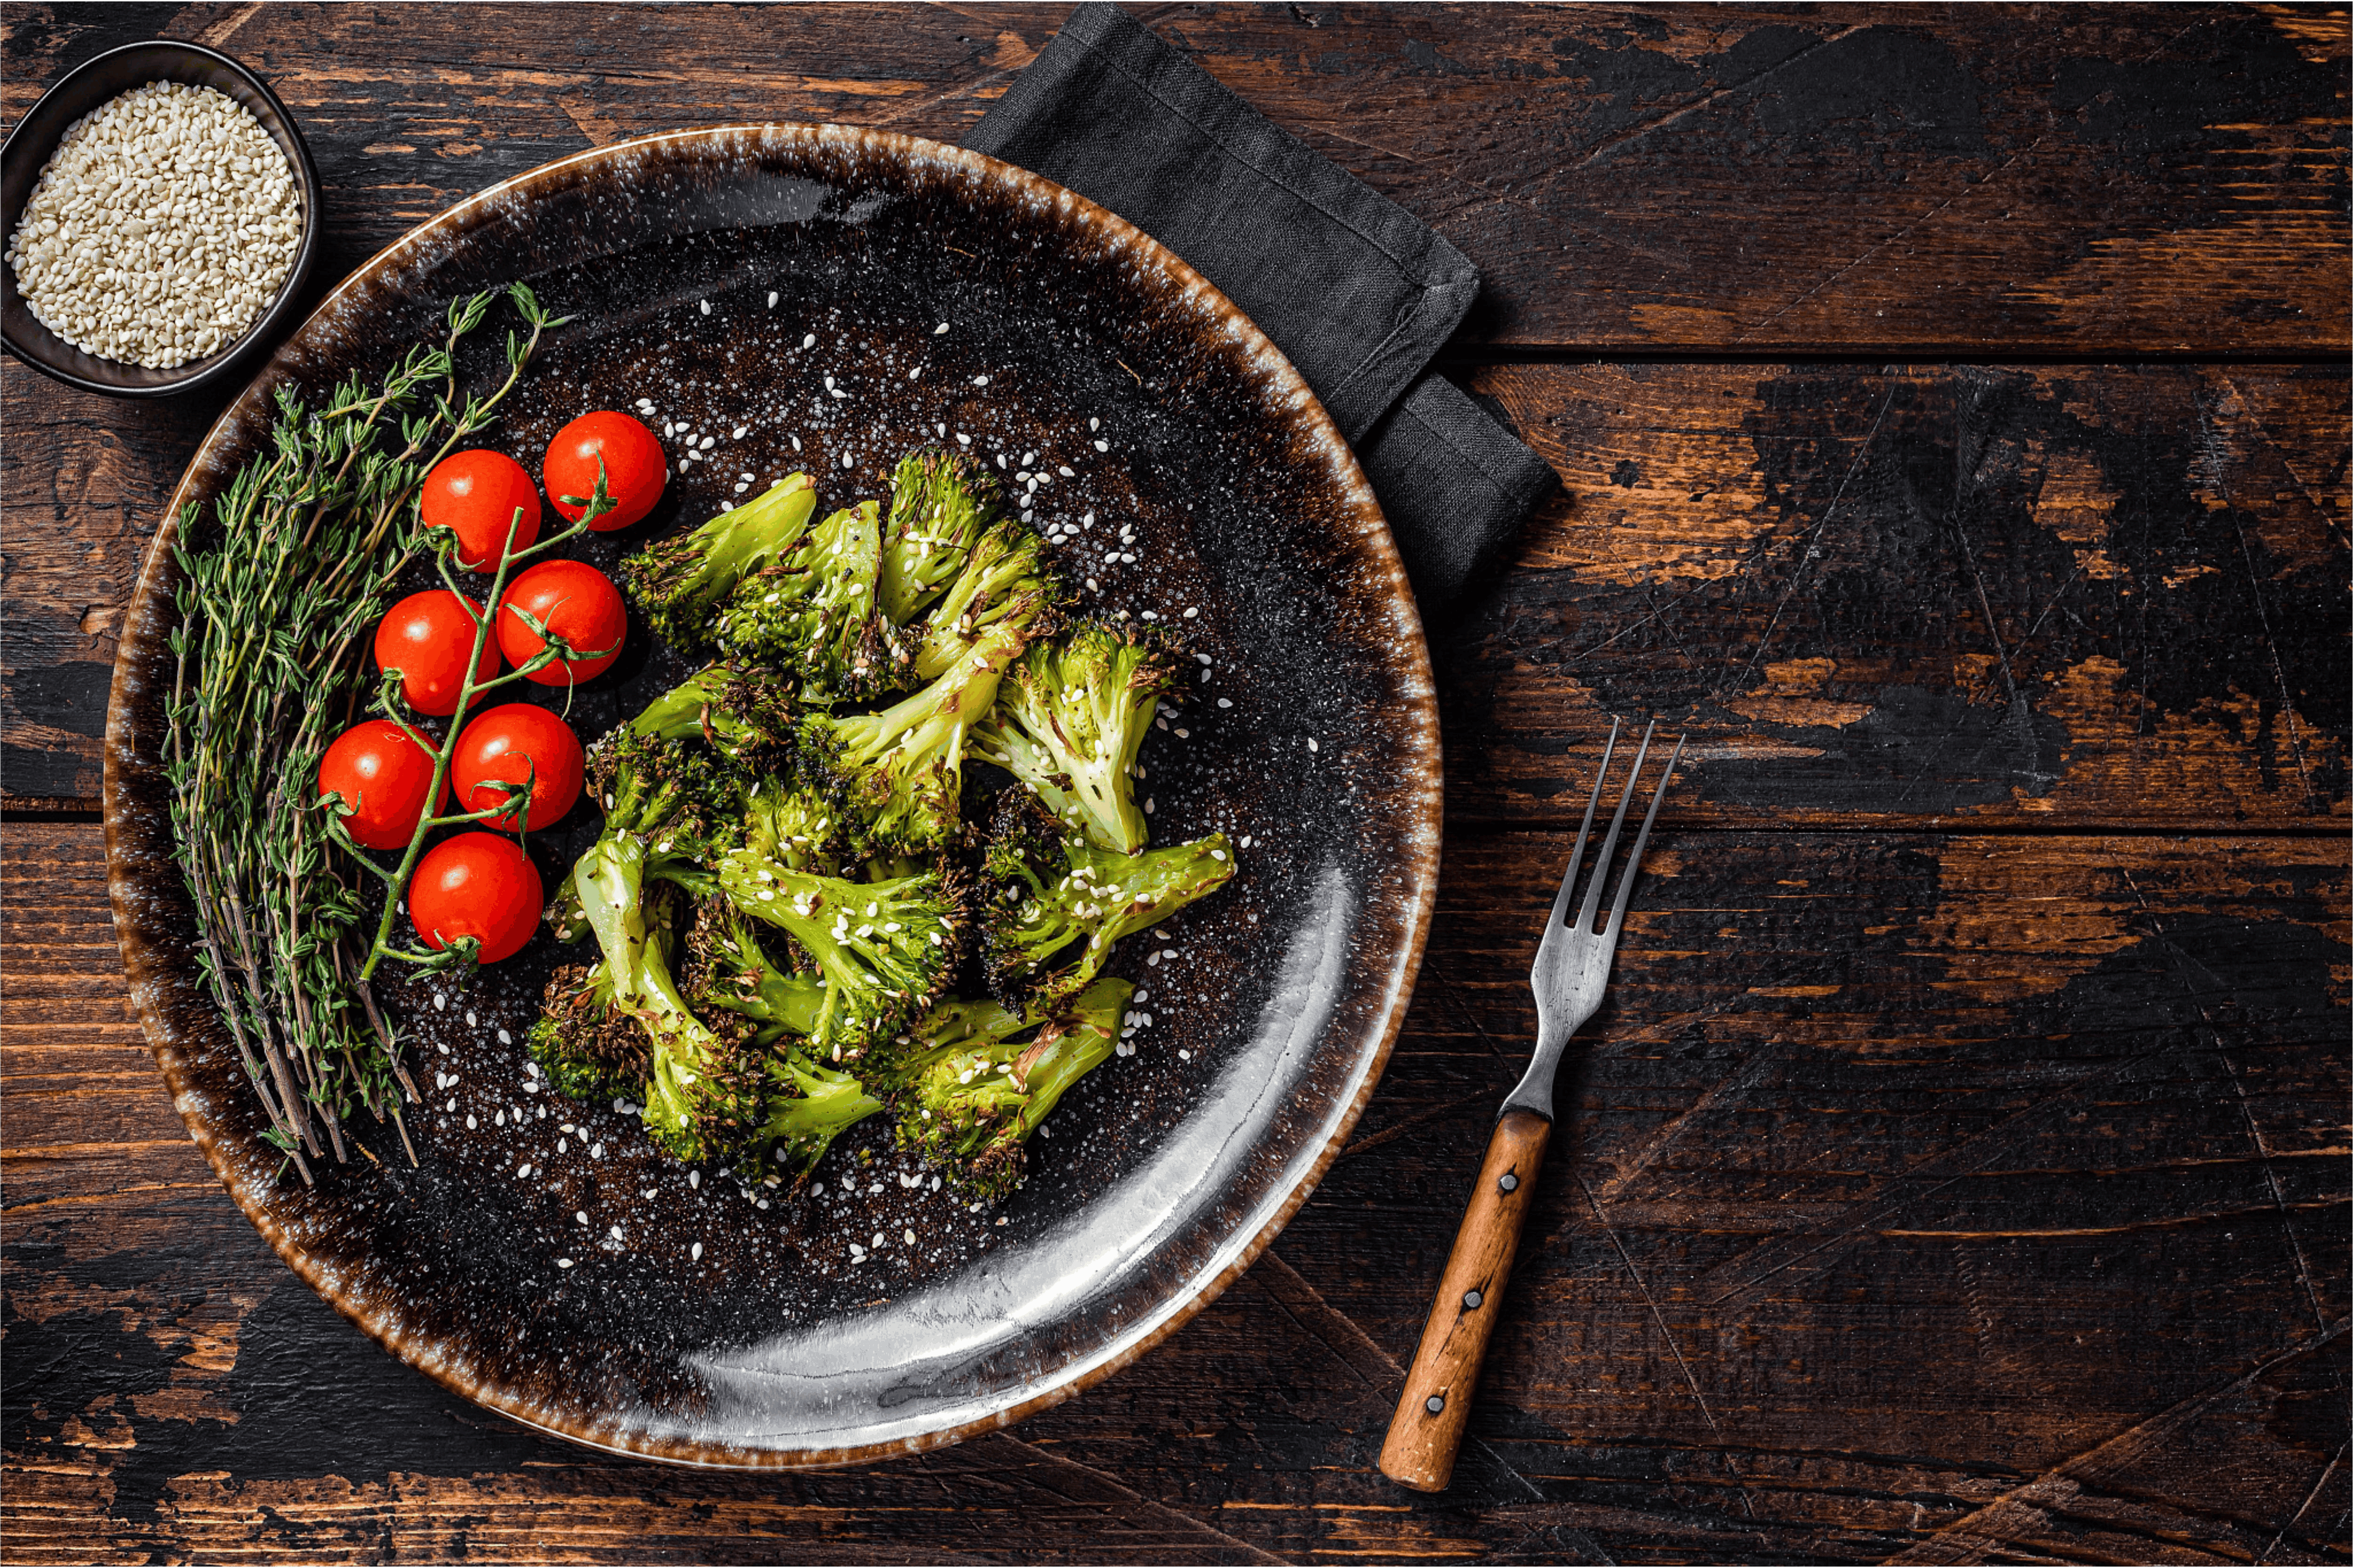 With X&E Smokeless Grill, you can easily prepare crispy and flavorful broccoli that is sure to please everyone's taste buds.